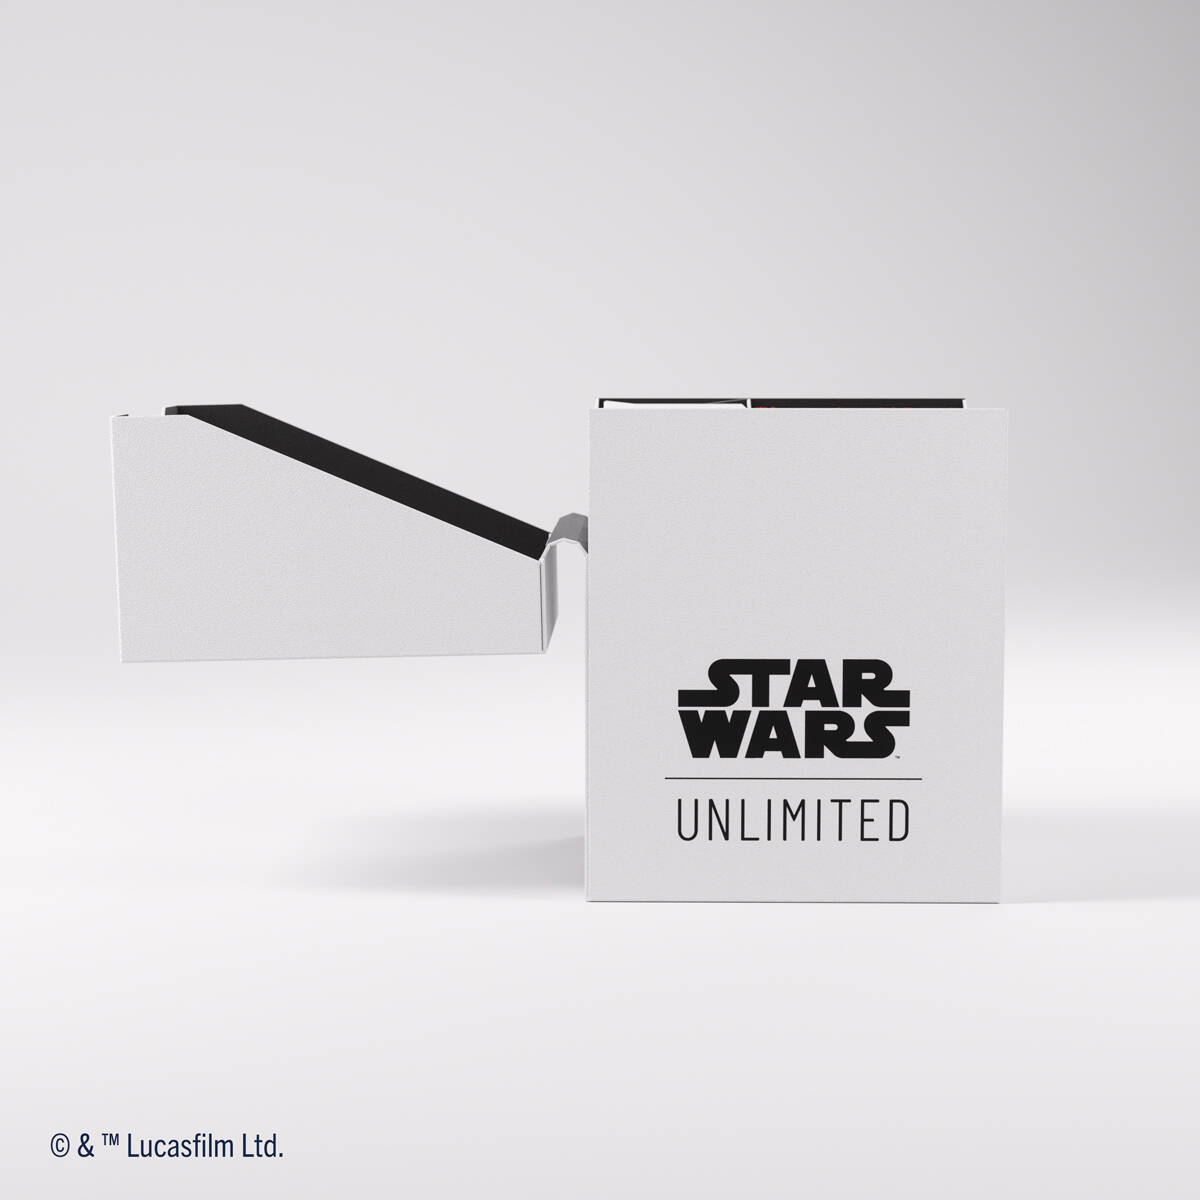 Star Wars: Unlimited Soft Crate White